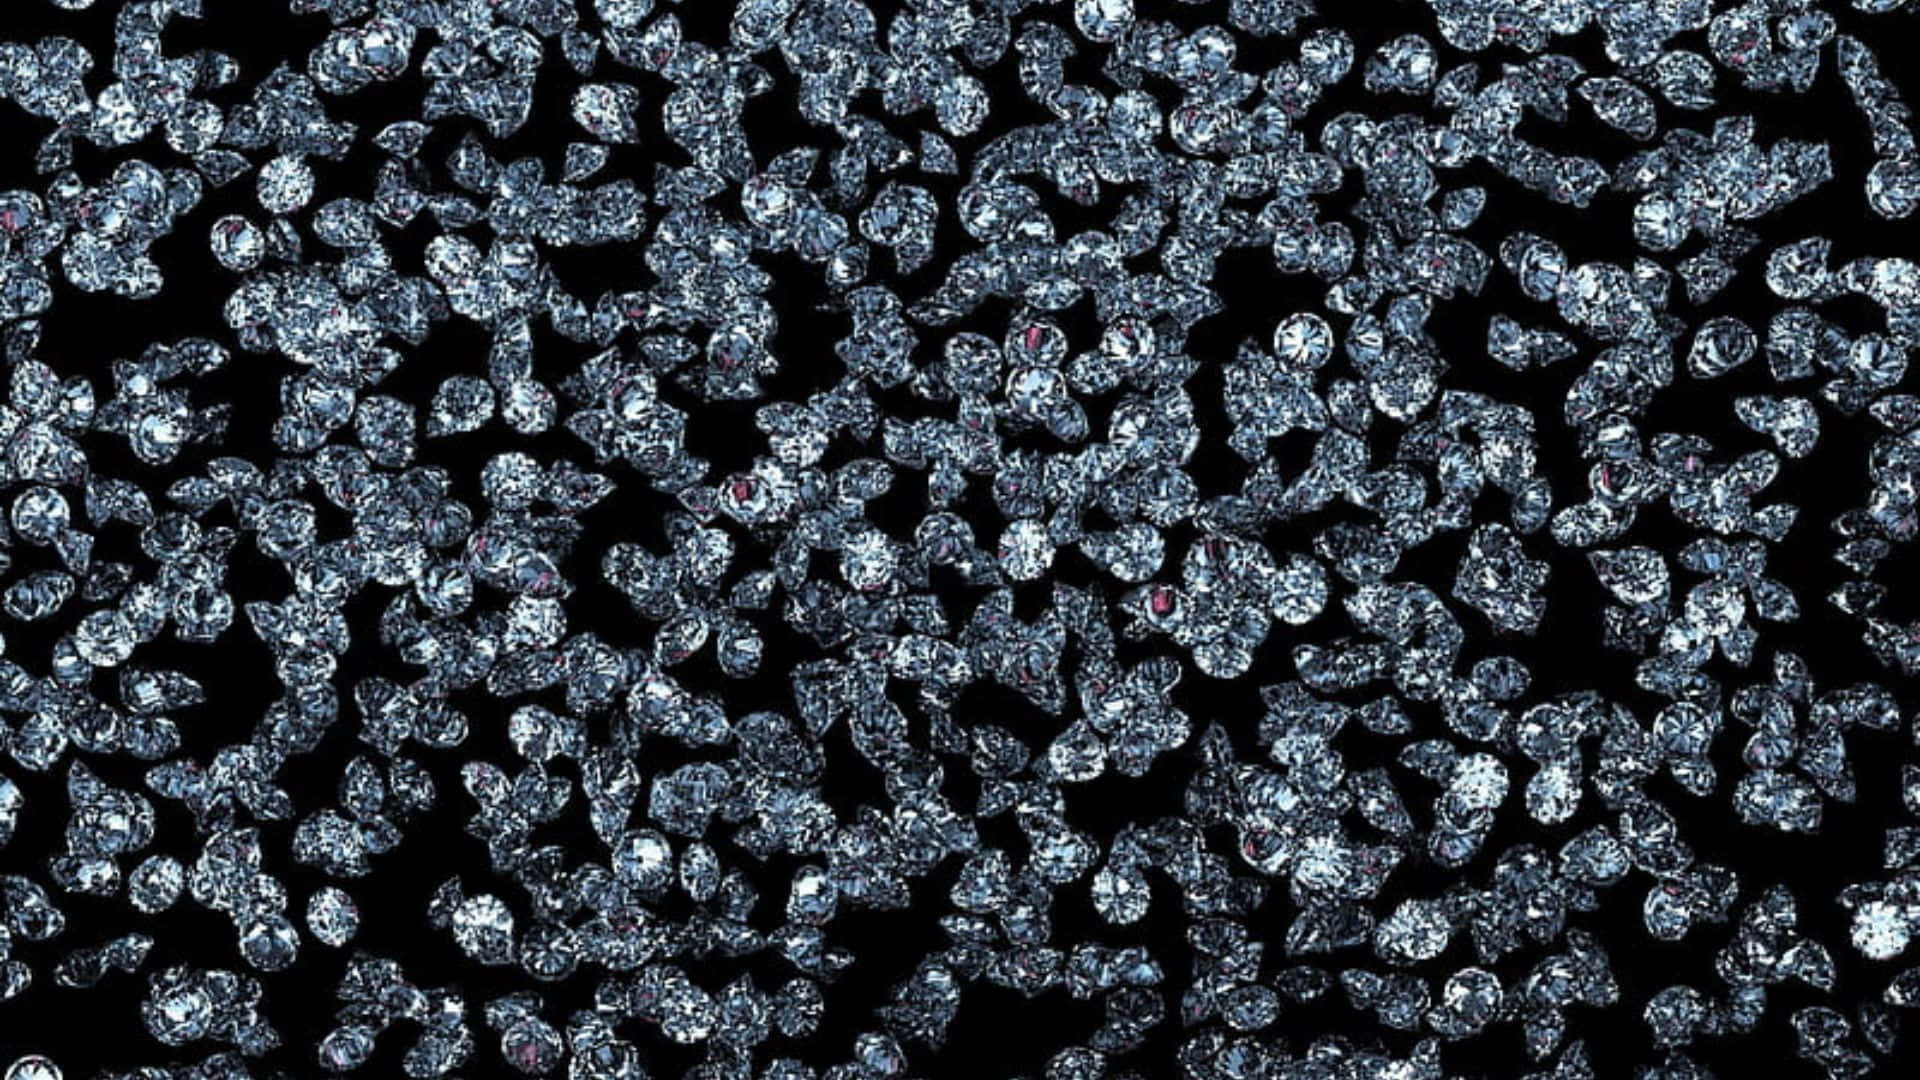 A Black Background With Many Small Blue And White Dots